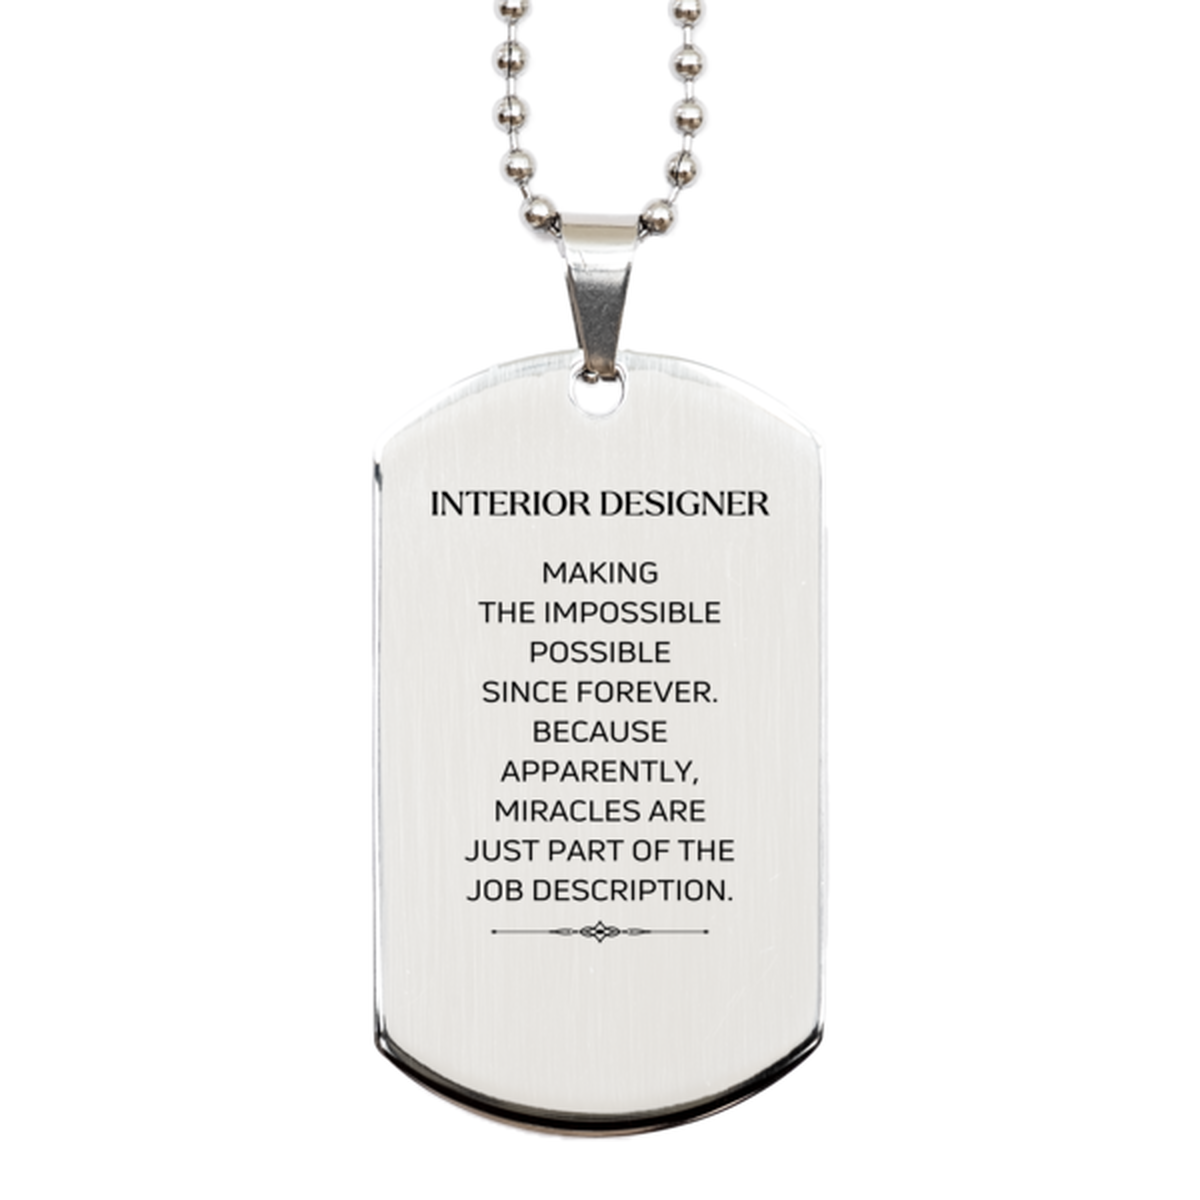 Funny Interior Designer Gifts, Miracles are just part of the job description, Inspirational Birthday Silver Dog Tag For Interior Designer, Men, Women, Coworkers, Friends, Boss